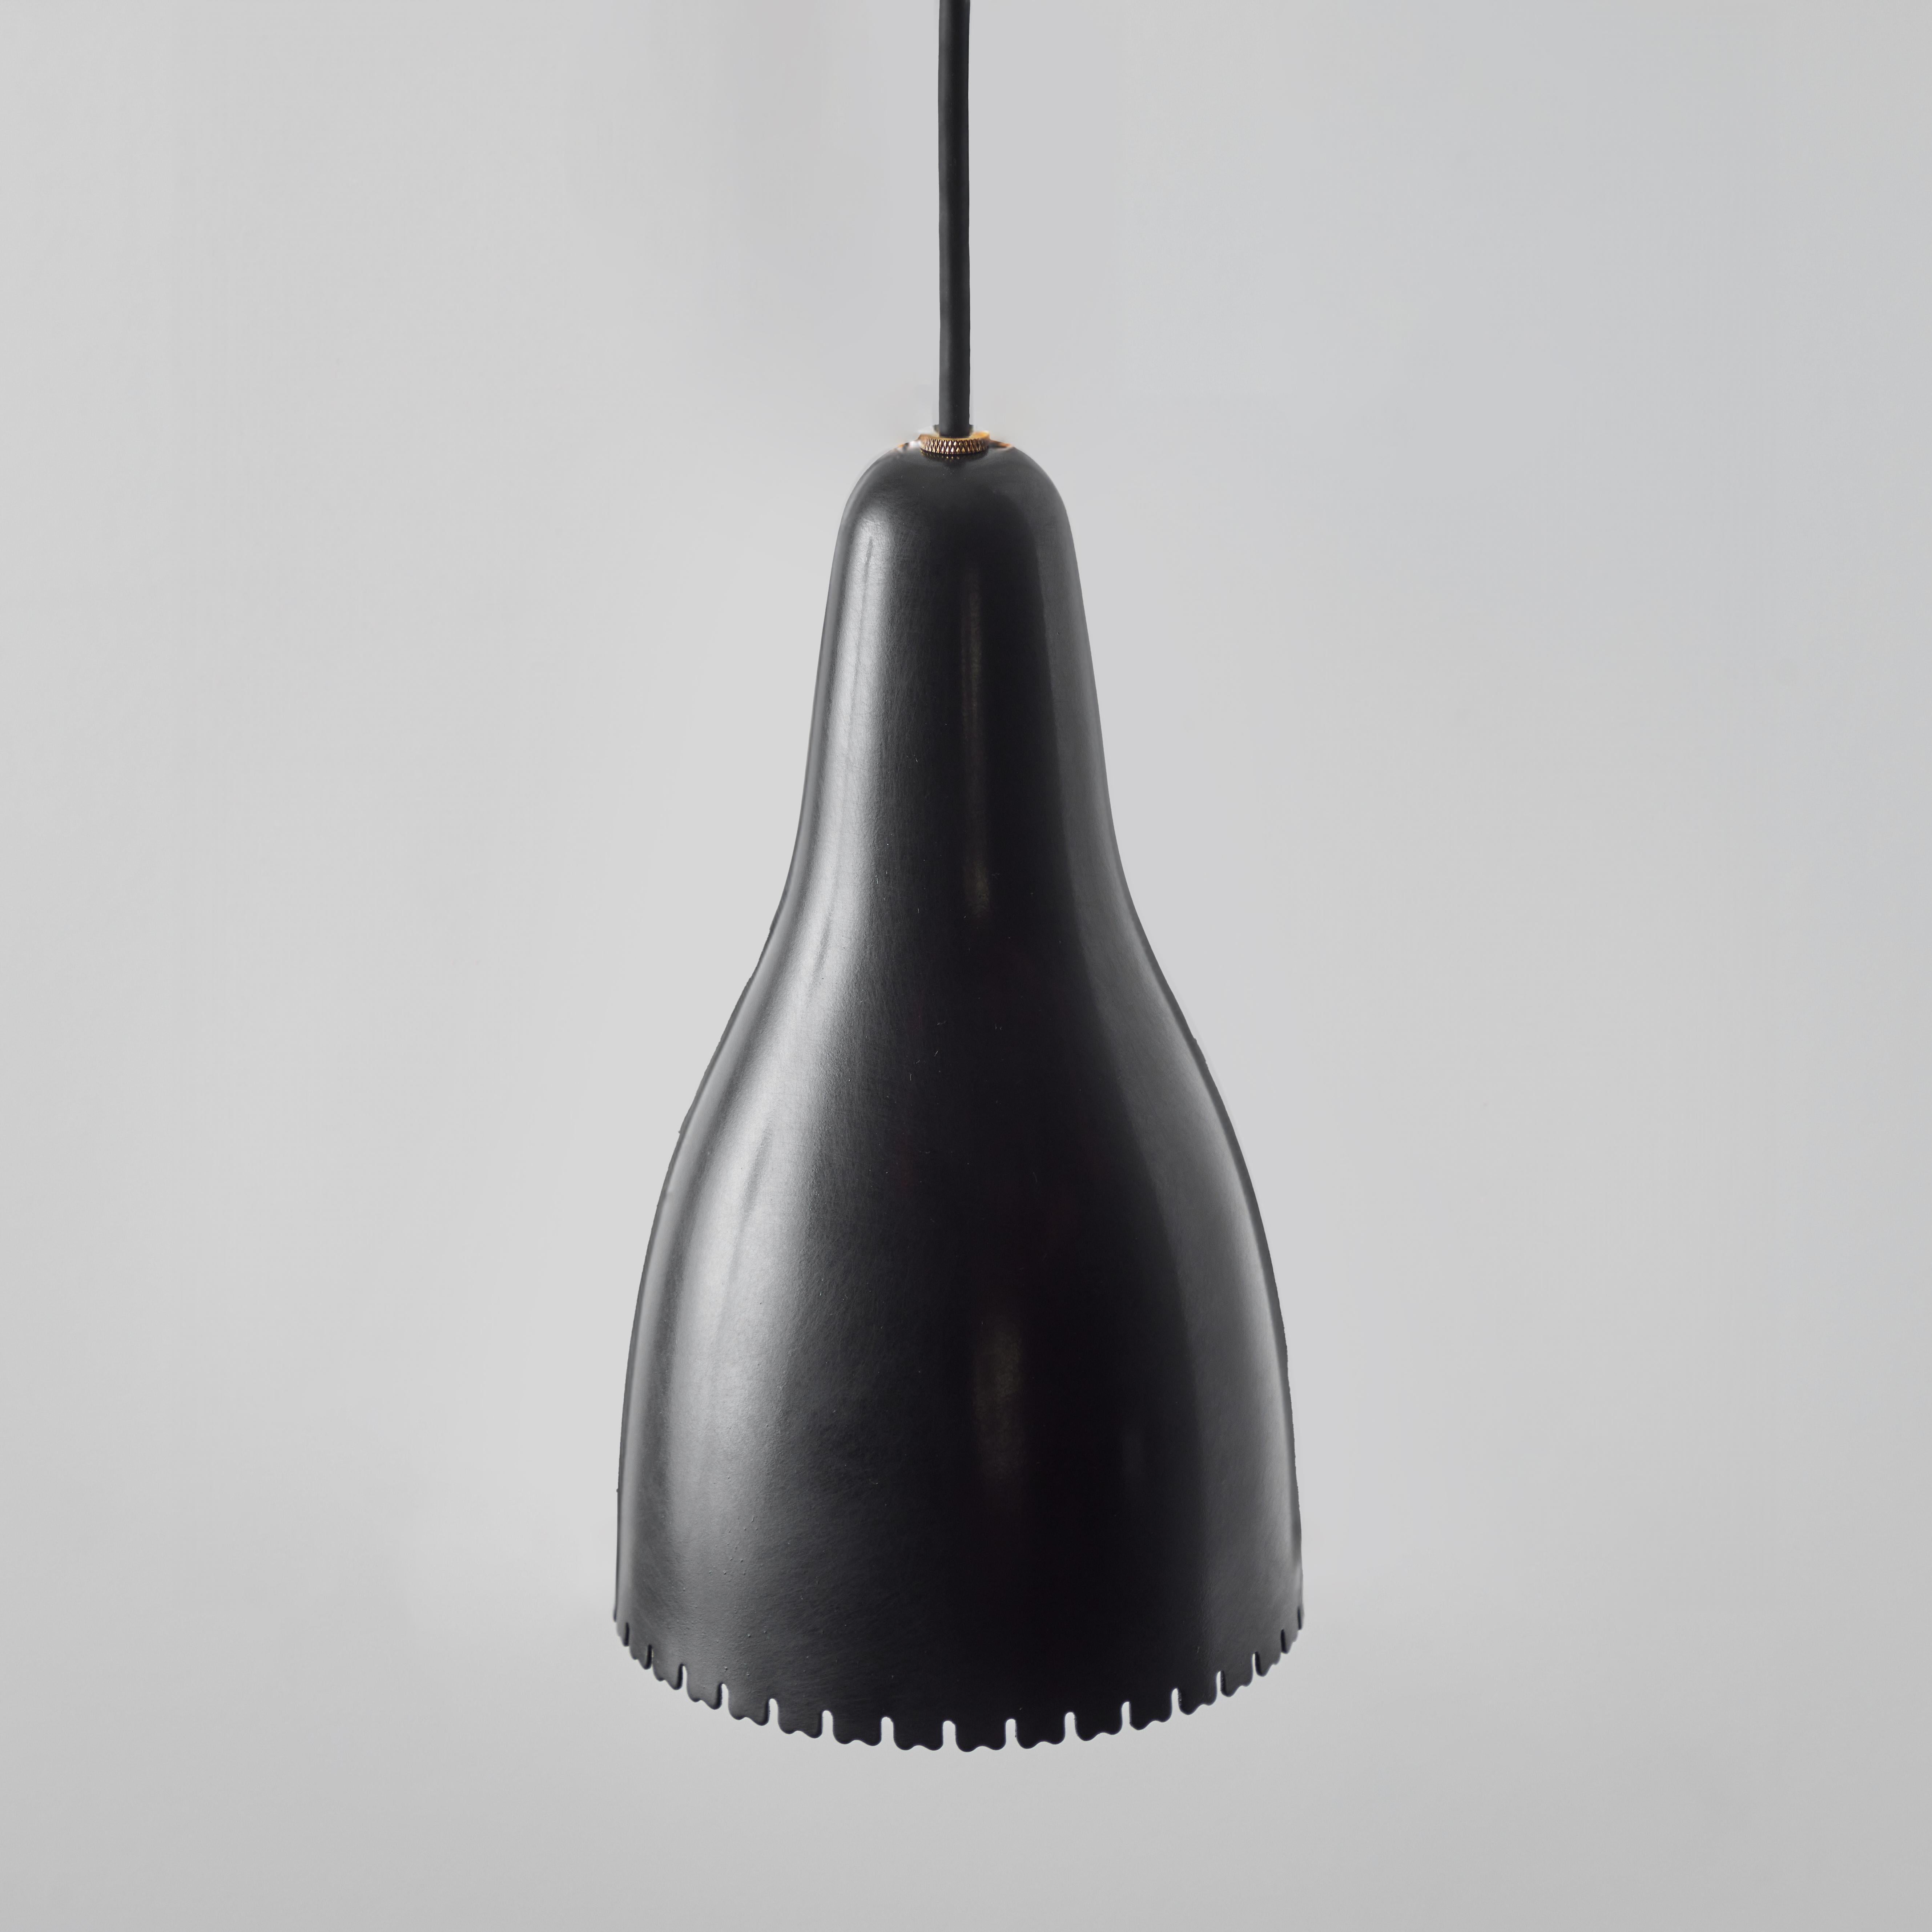 1950s Bent Karlby Black Painted Metal & Brass Pendant Lamp for Lyfa In Good Condition For Sale In Glendale, CA